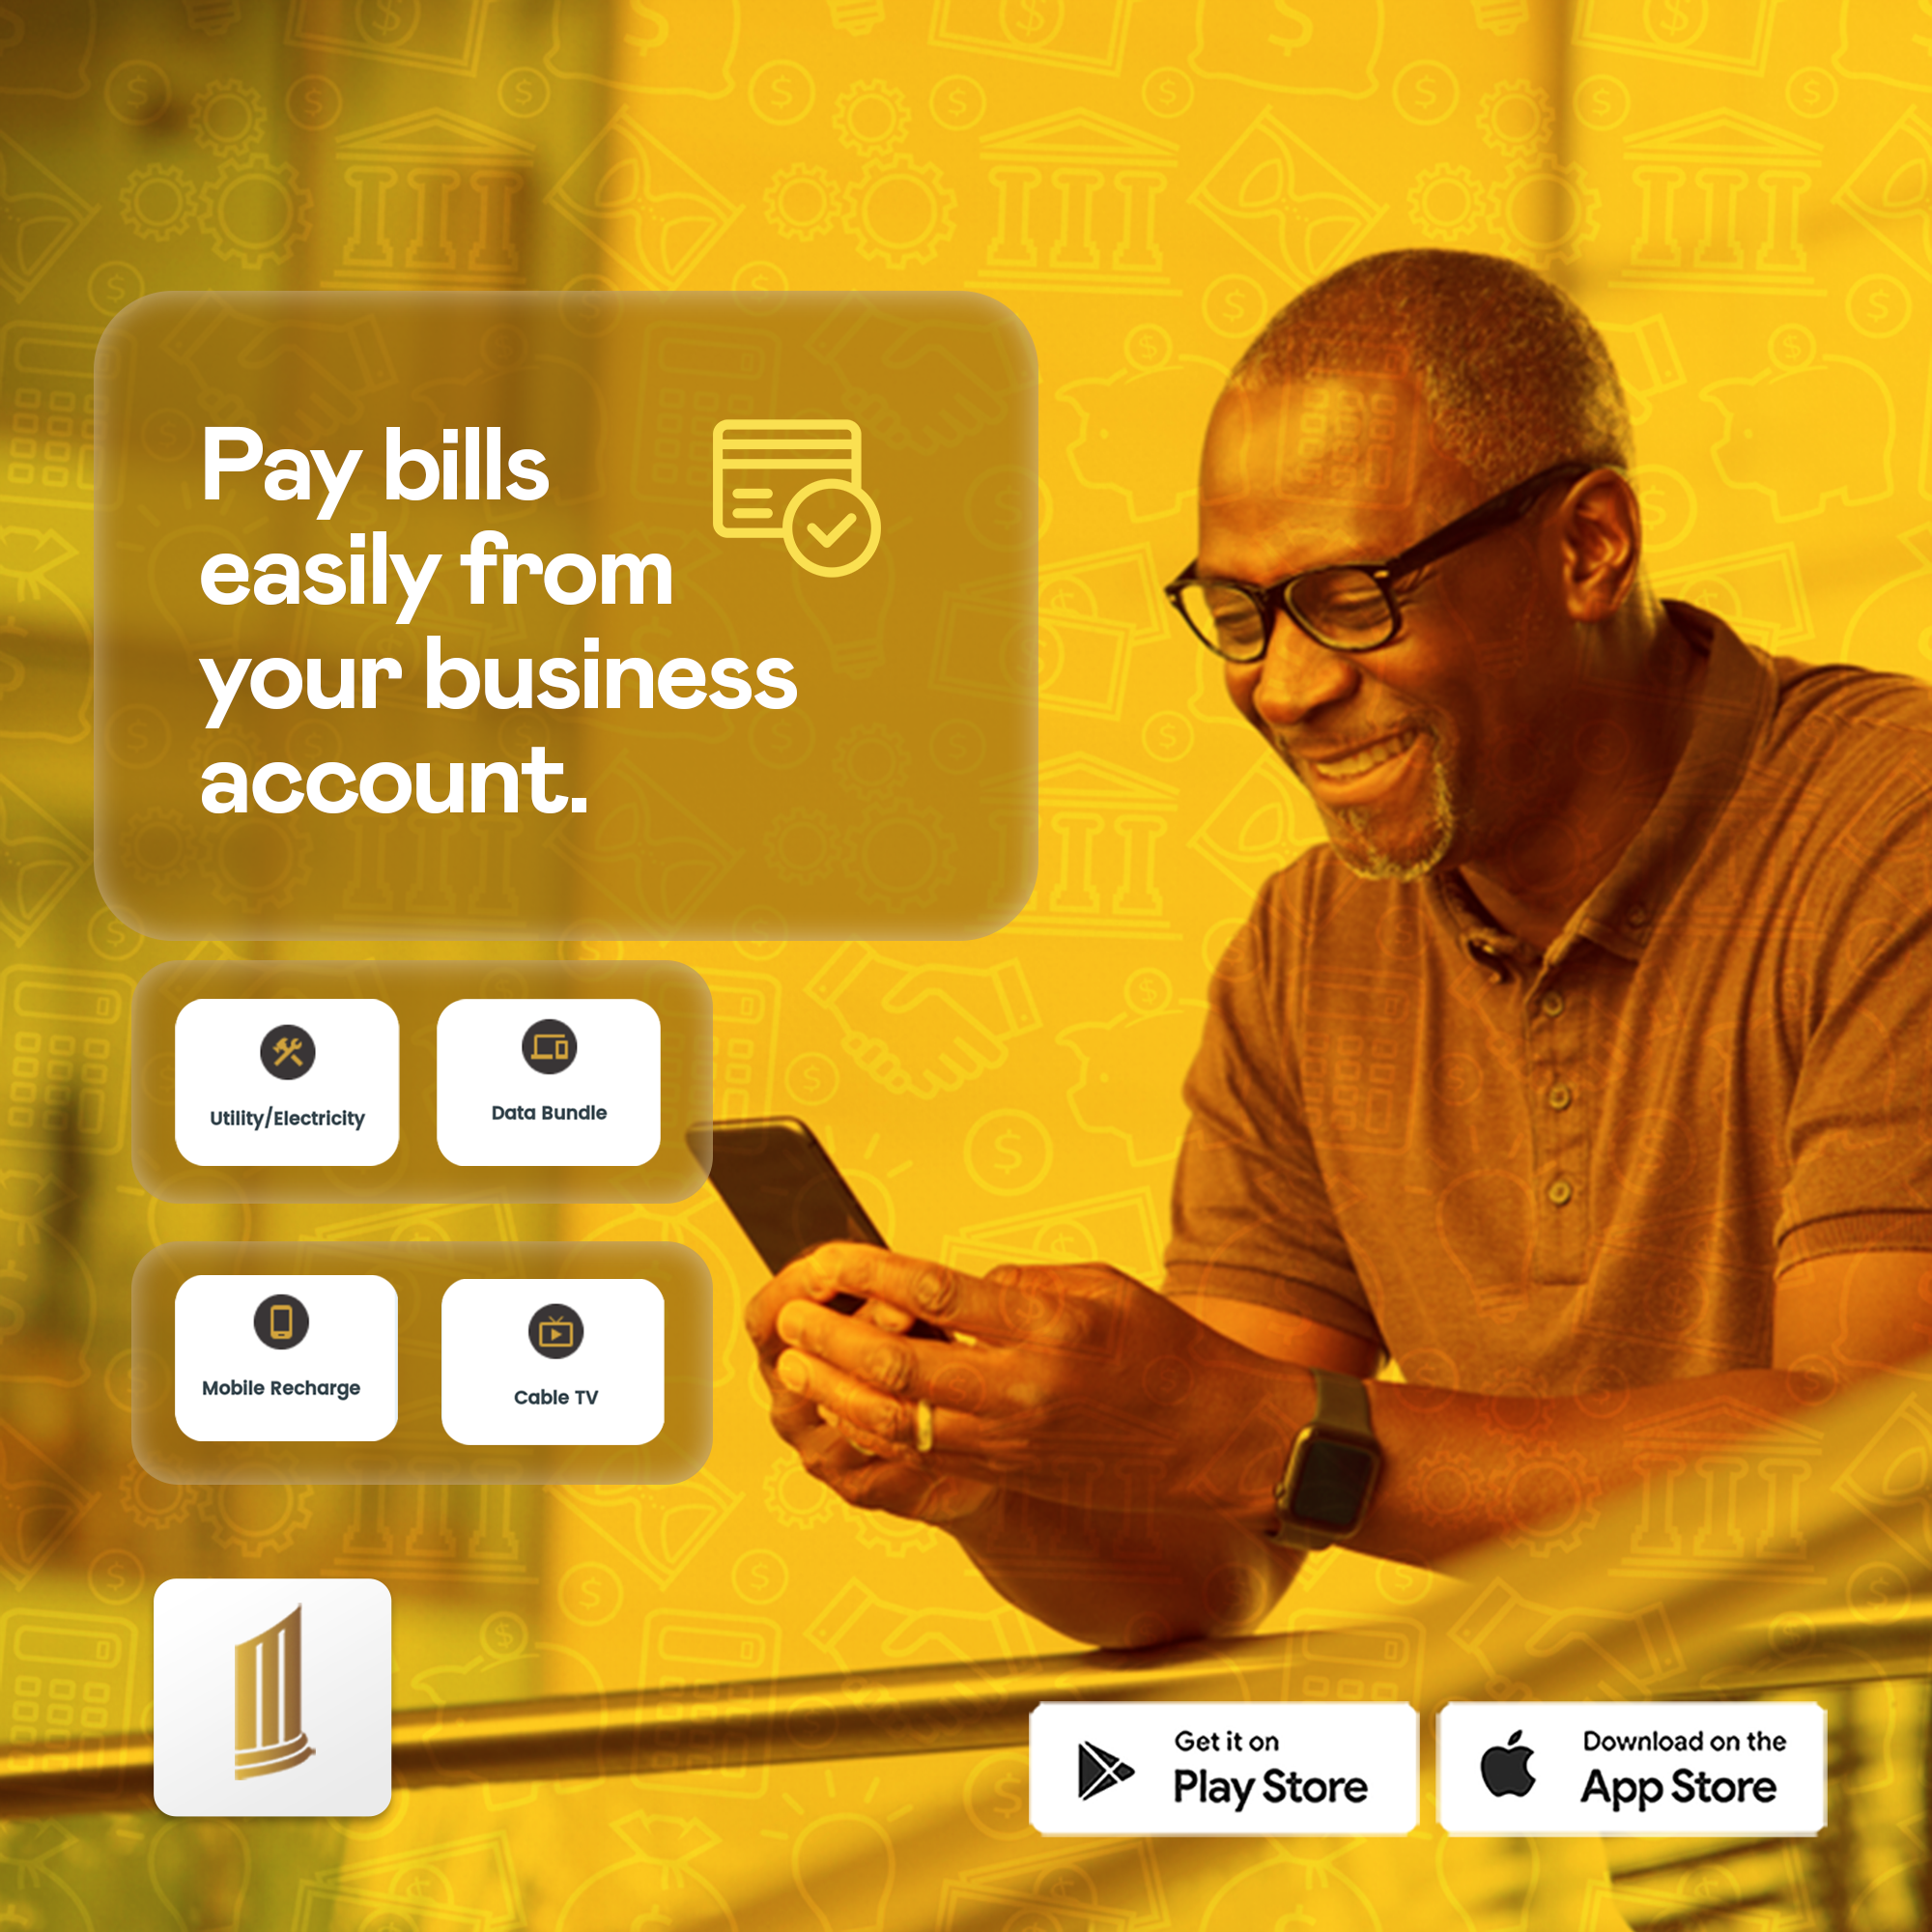 Pay bills easily from your business account.